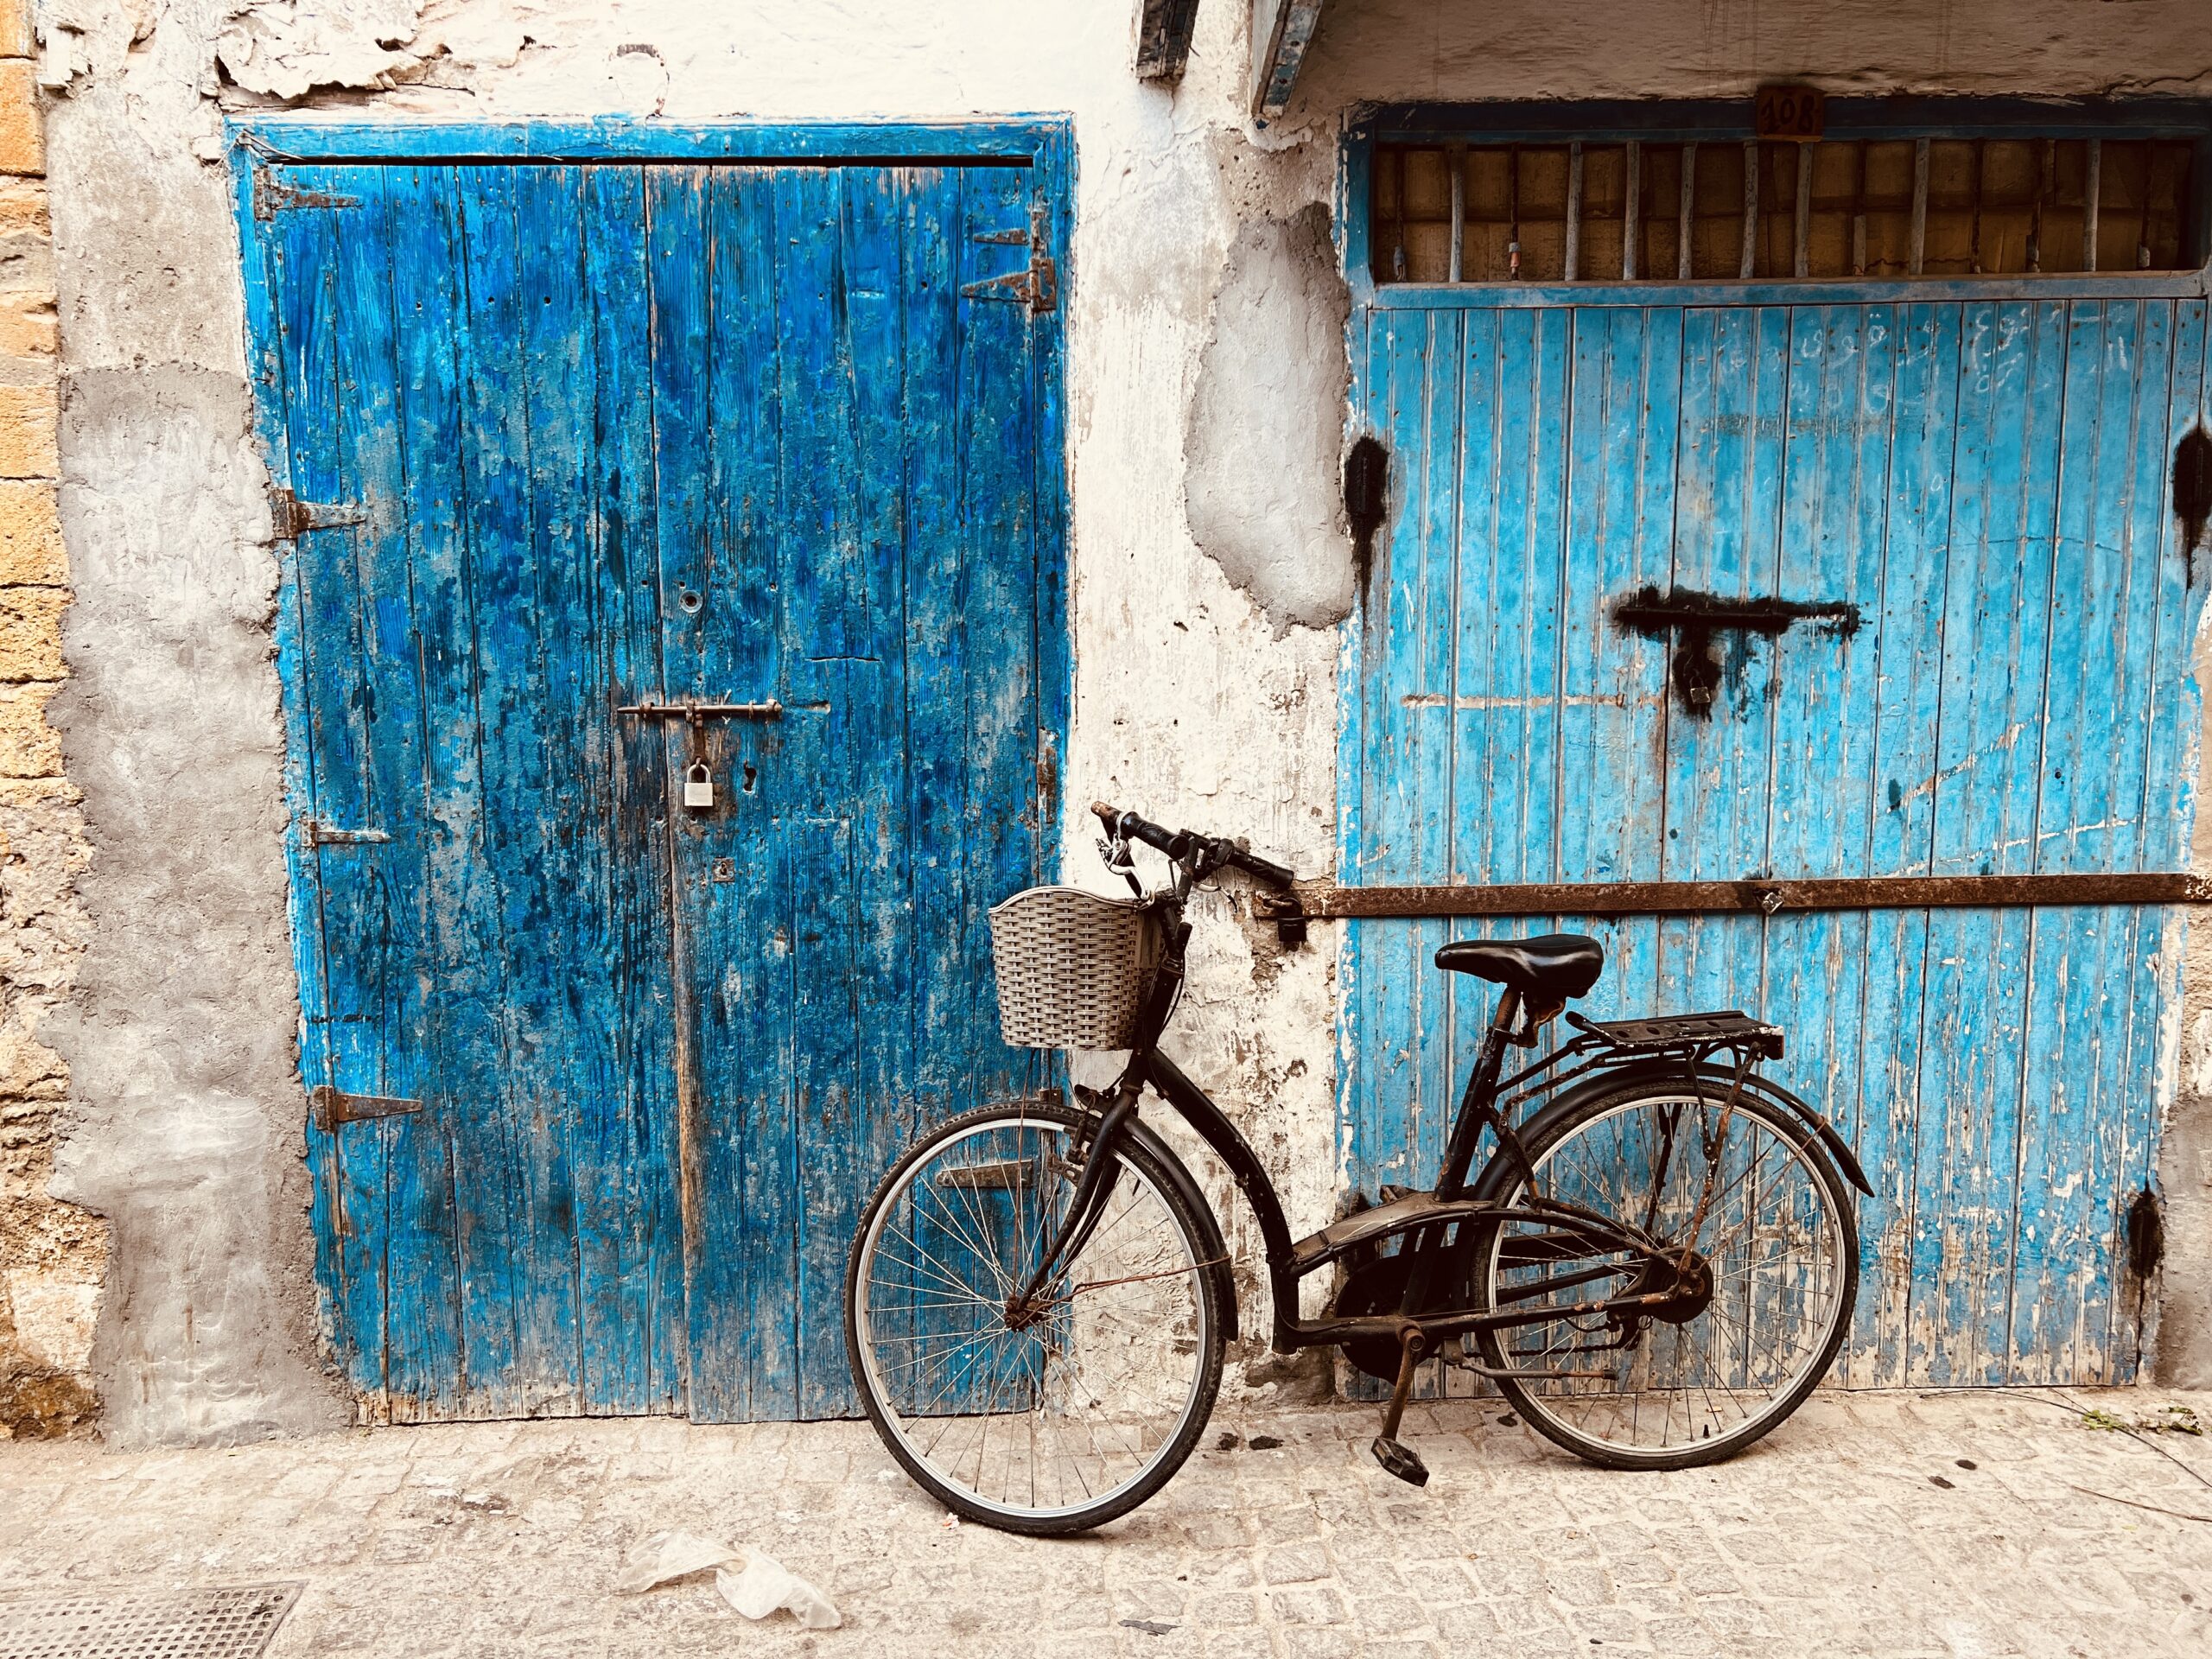 black bicycle with basket propped against a wall that has two weathered blue doors